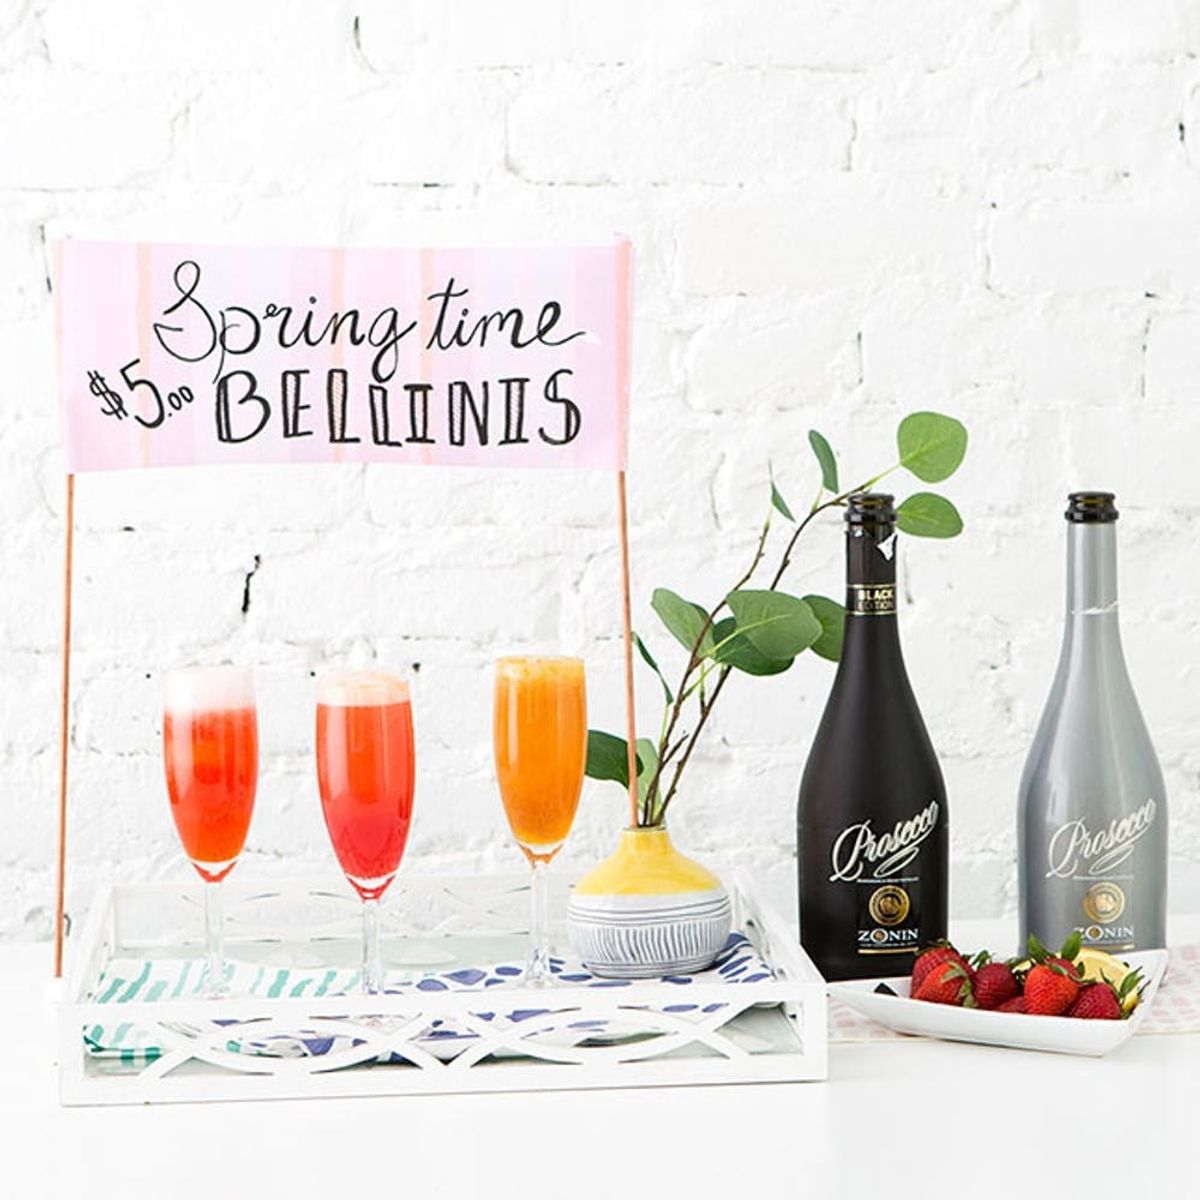 How to Make Fruit Bellini Recipes for Spring